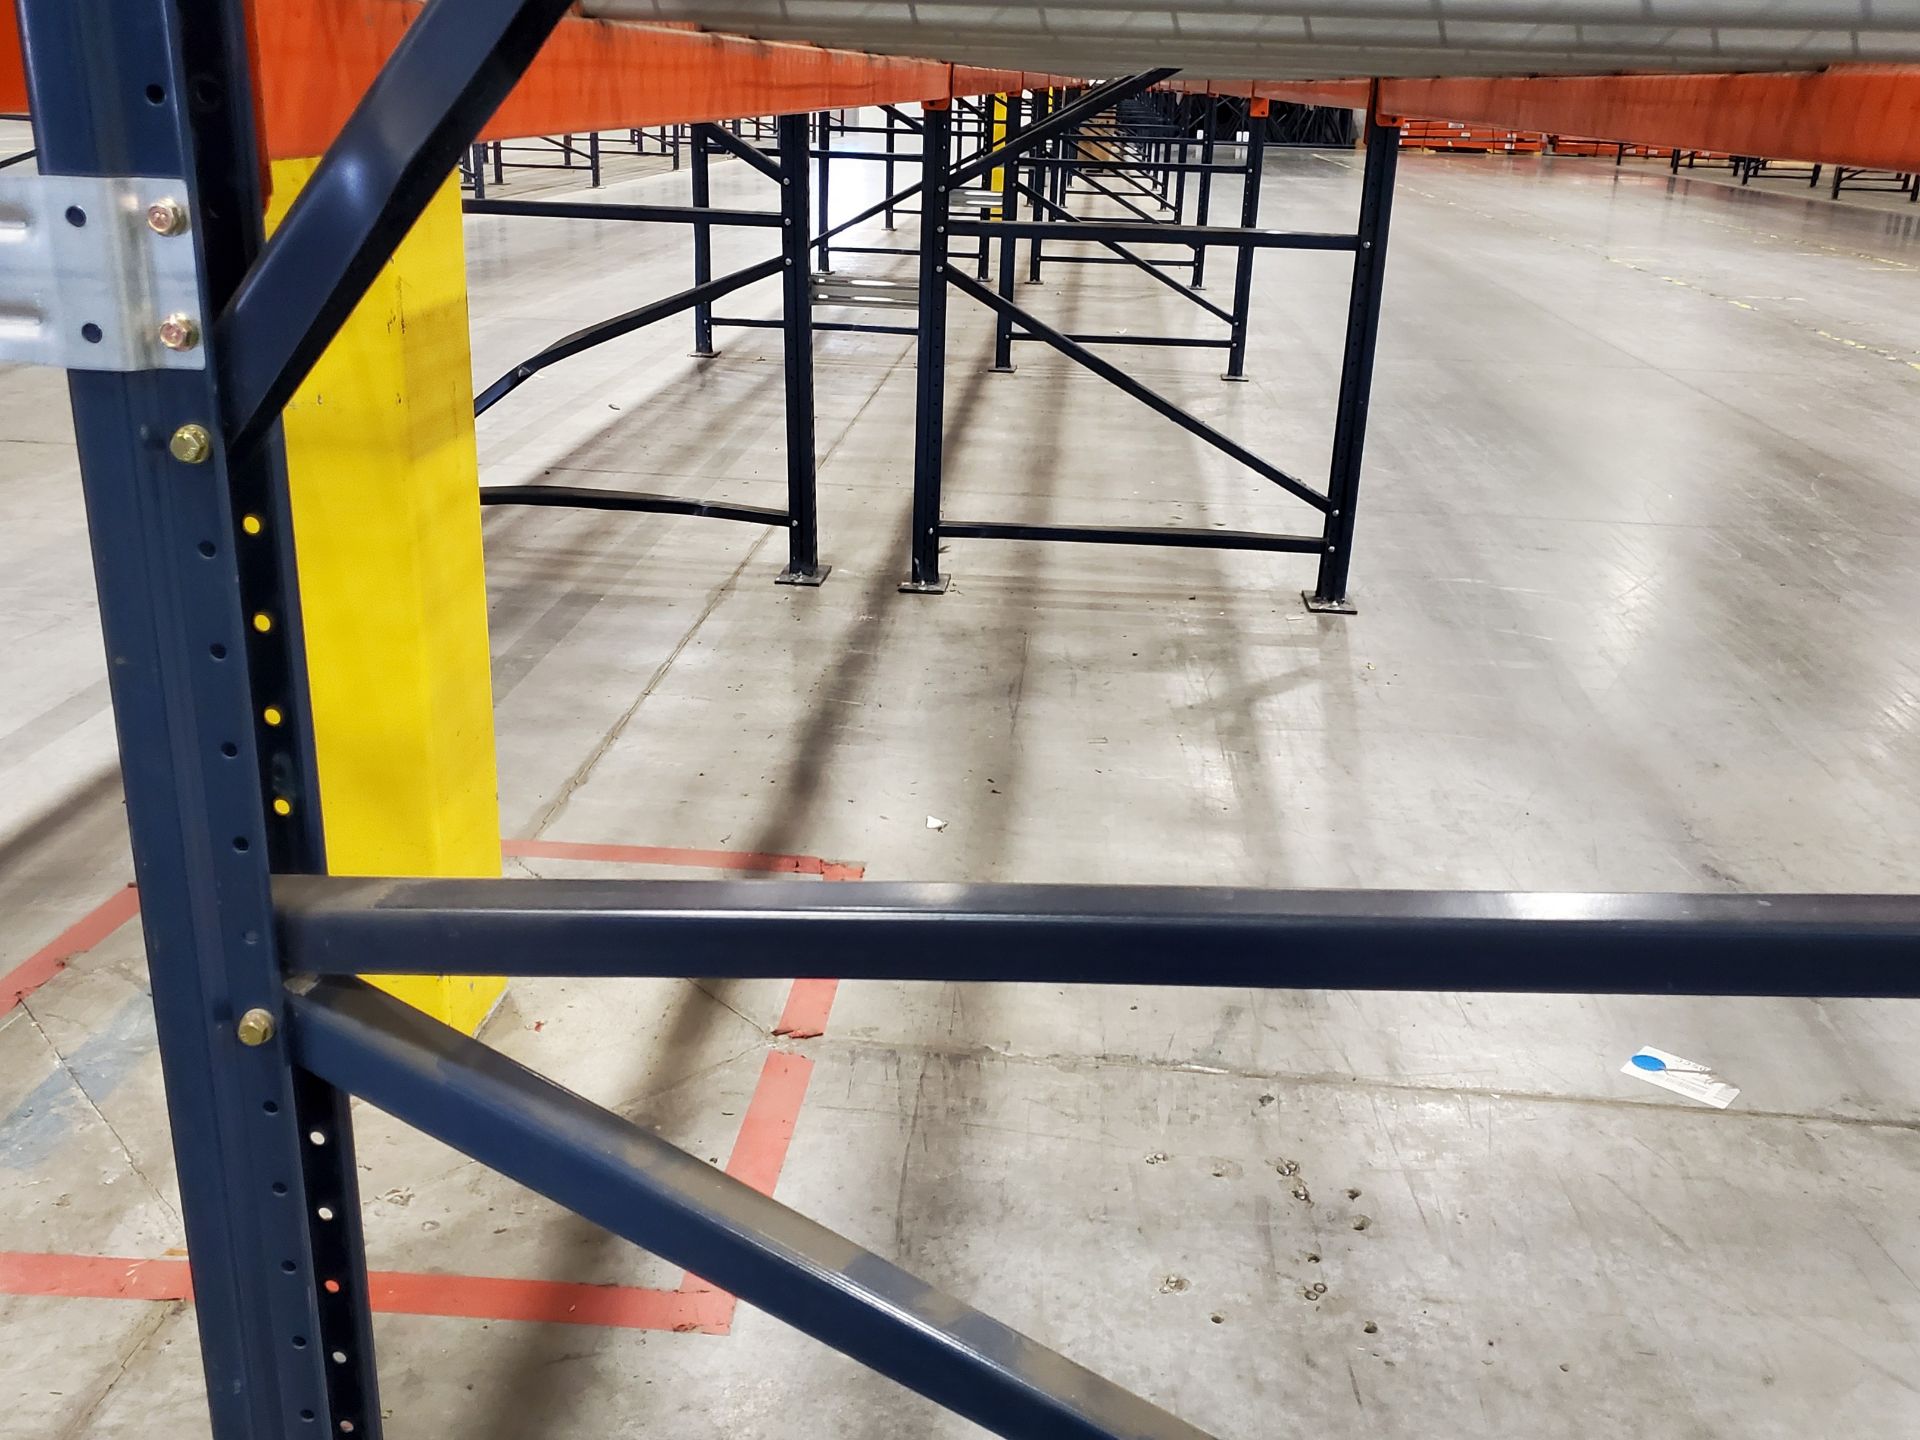 (20) BAYS OF MECALUX TEAR DROP PALLET RACKING, (22) 21' X 48’‘ UPRIGHTS, (158) 13' X 4-3/4" - 6.5" - Image 4 of 6